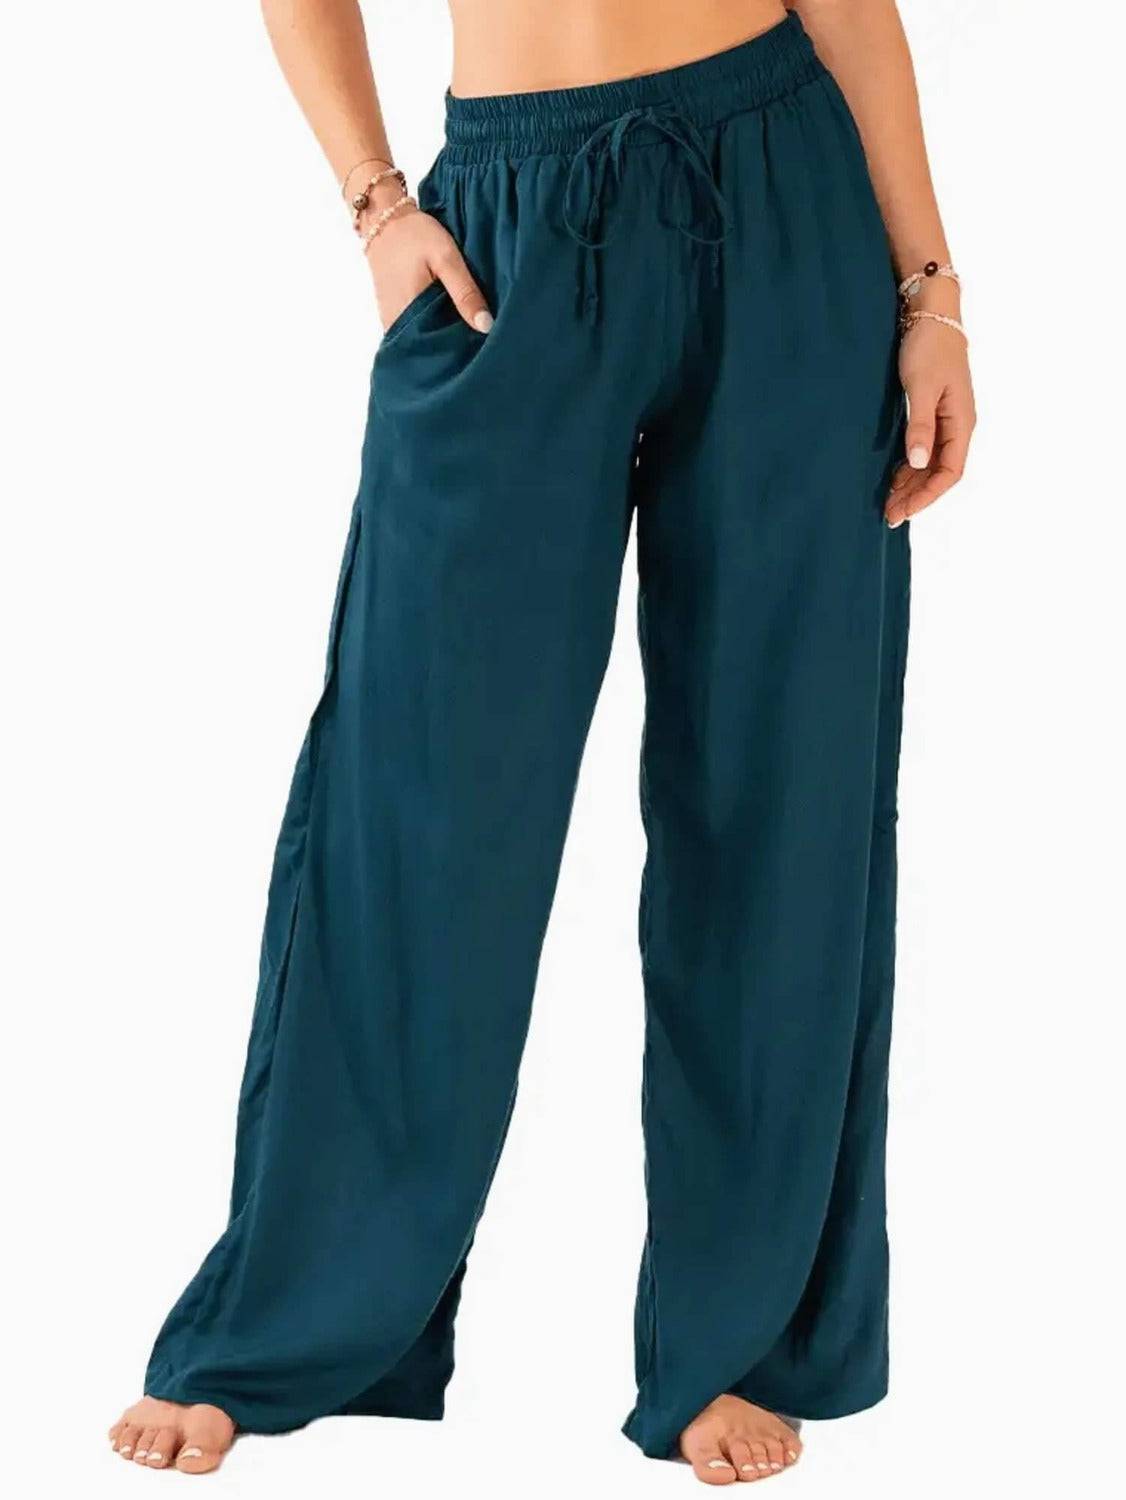 boho wide leg pants with drawstring waist in teal